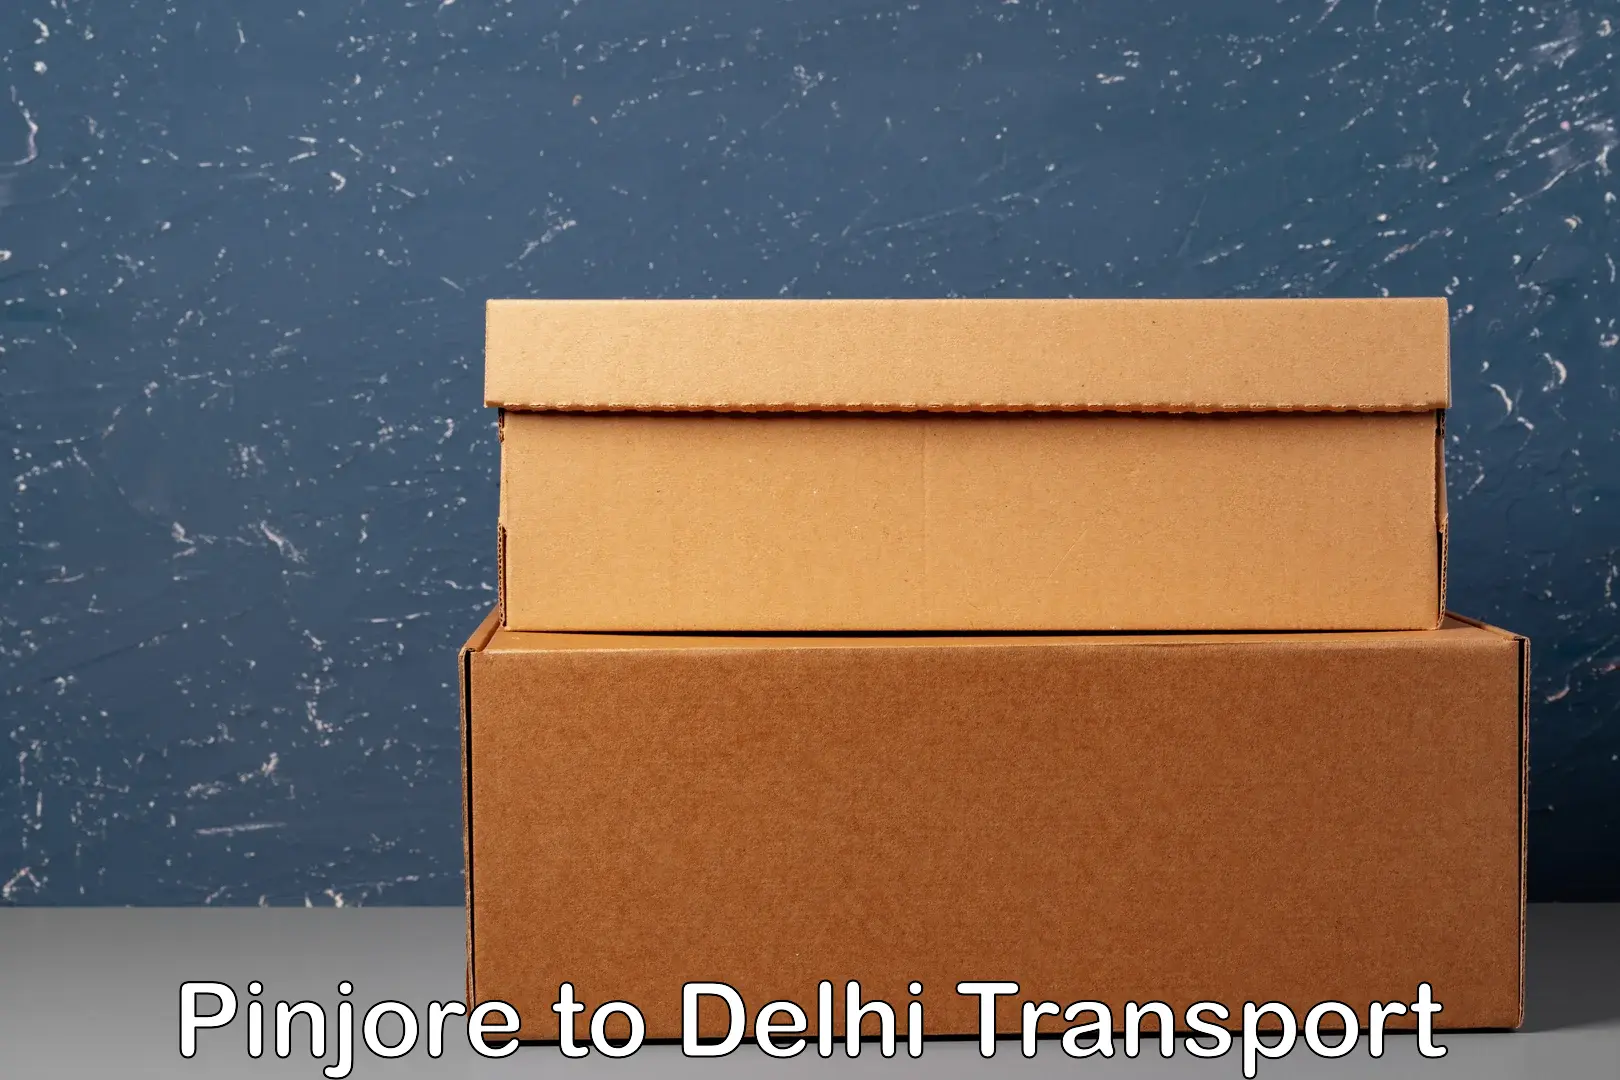 Lorry transport service Pinjore to Delhi